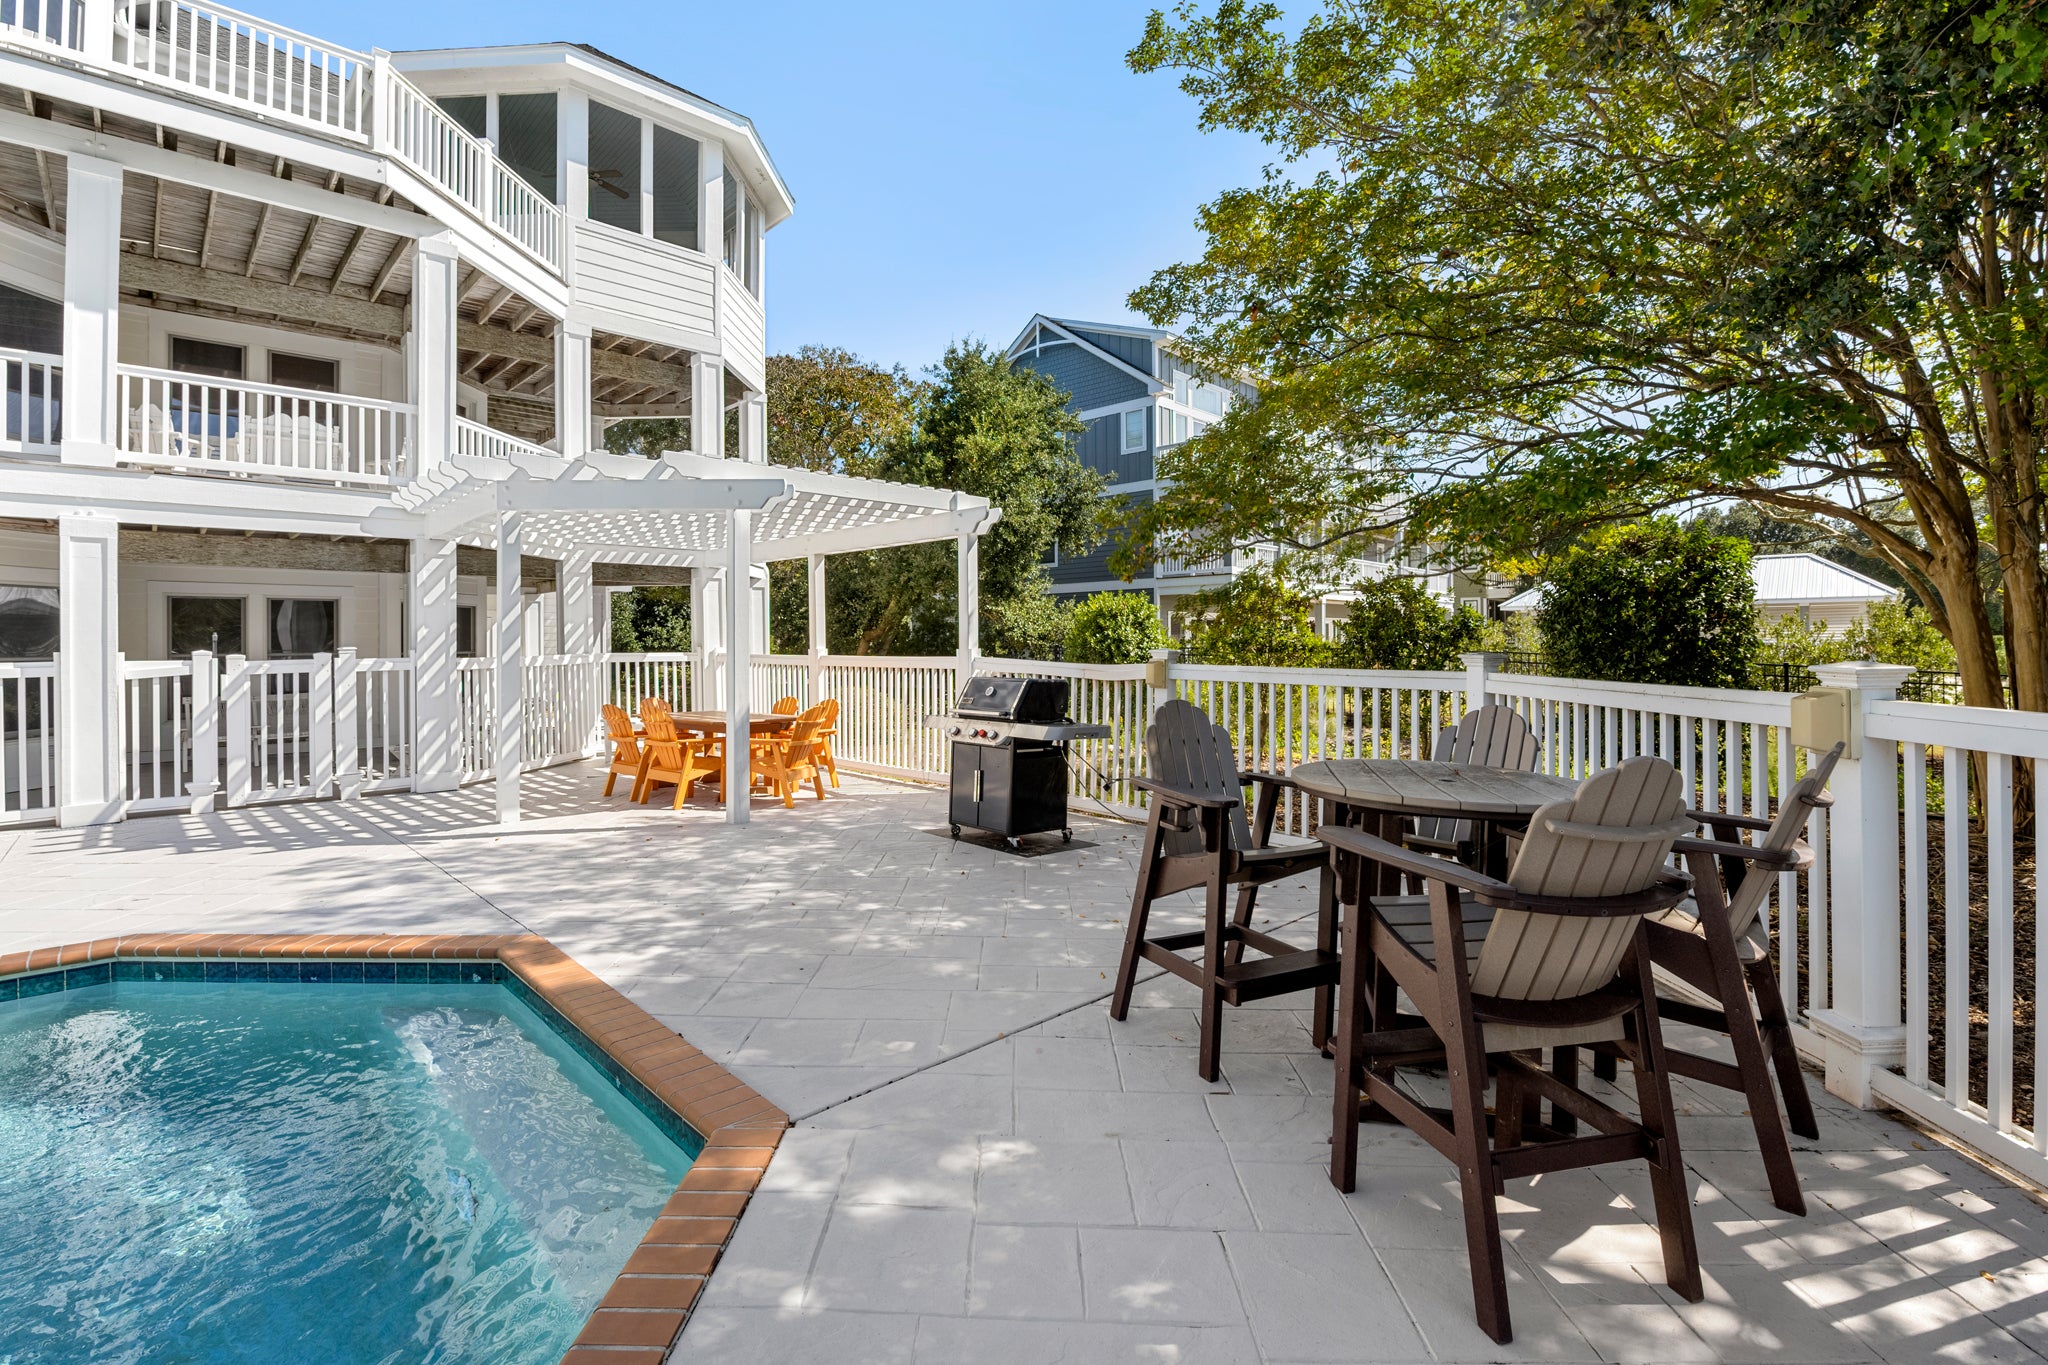 CC328: Wellfleet | Pool Area w/ Grill and Outdoor Dining Sets